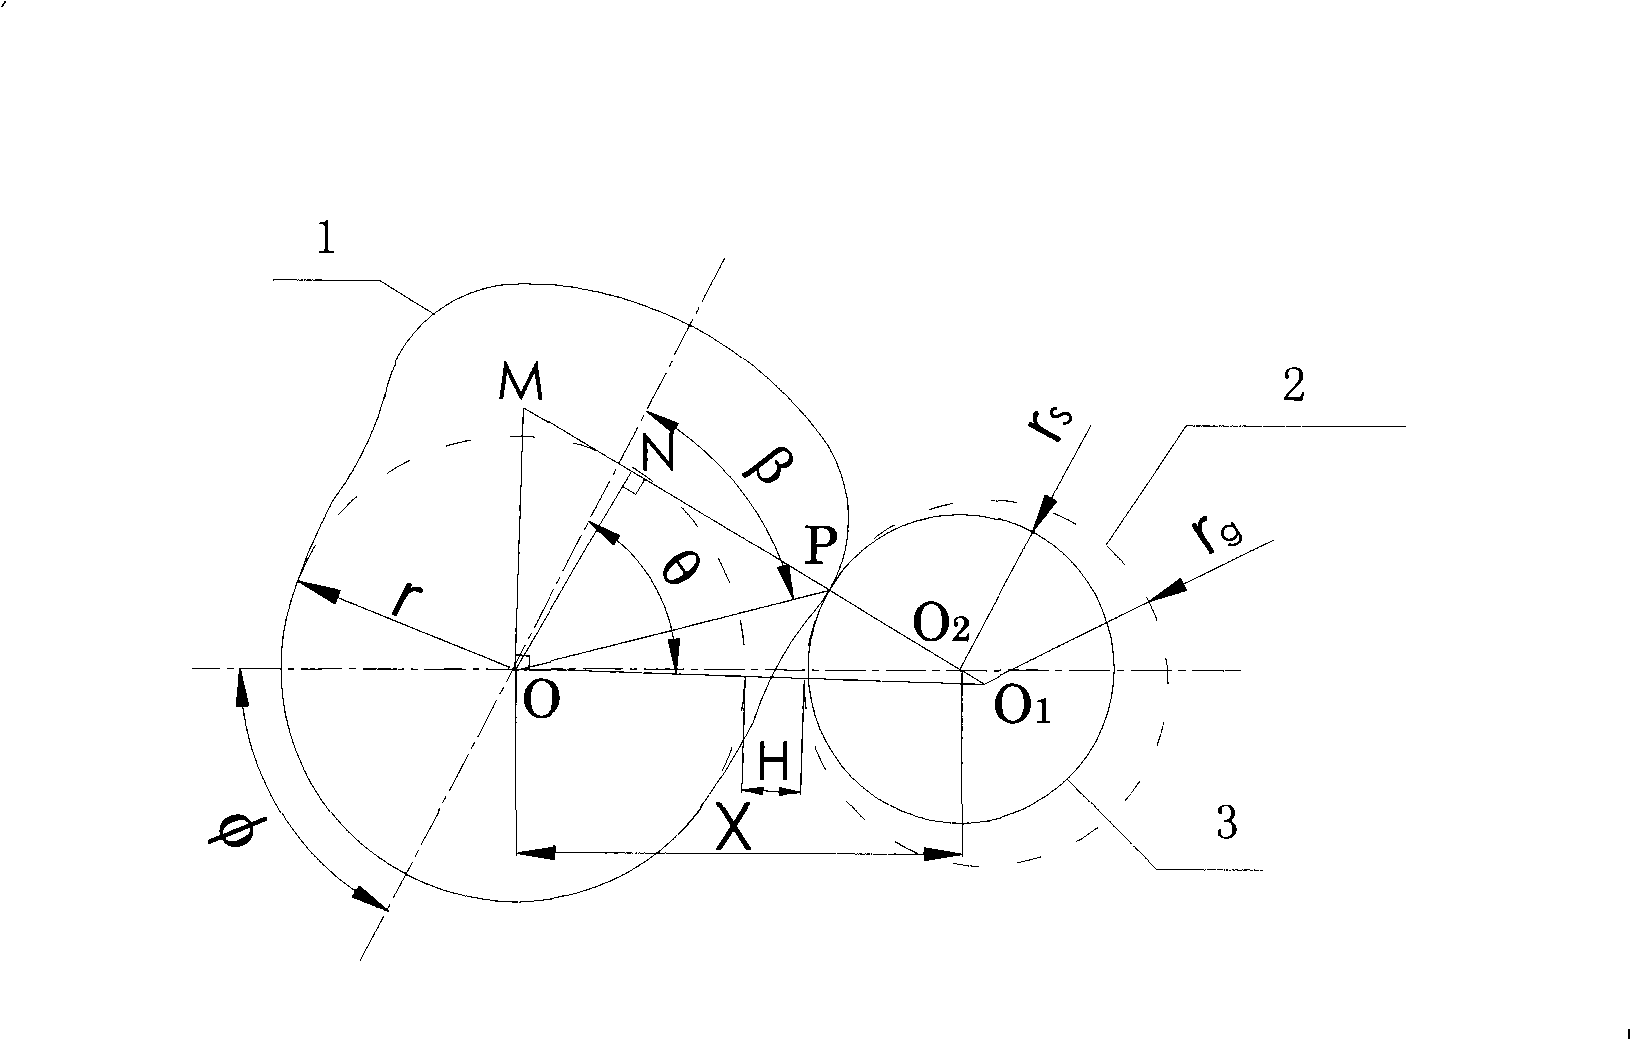 Speed change control method for cam non-circular grinding based on constant contact arc length